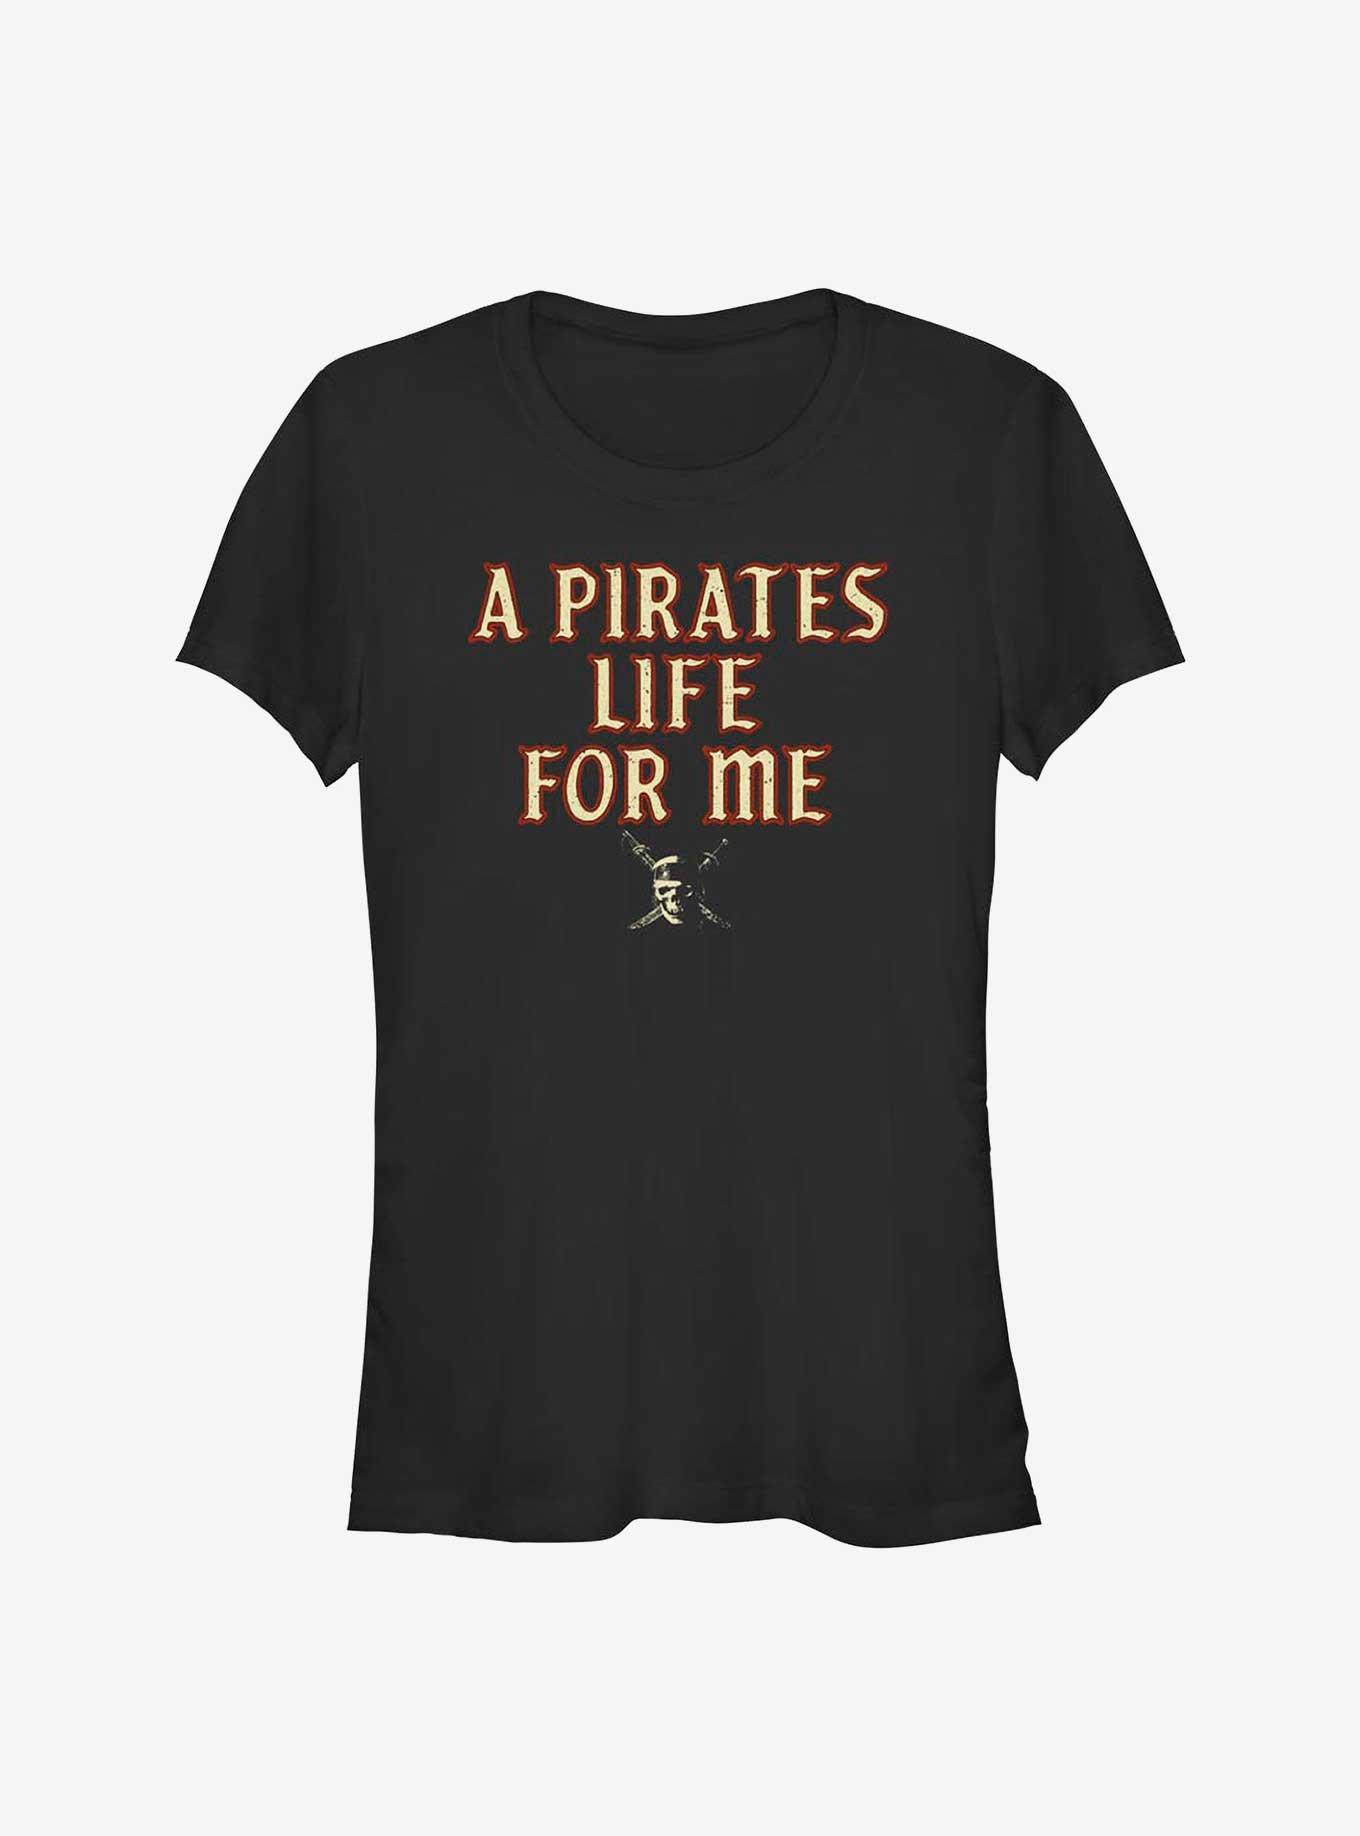 Disney Pirates of the Caribbean A Pirate's Life For Me Girls T-Shirt, BLACK, hi-res